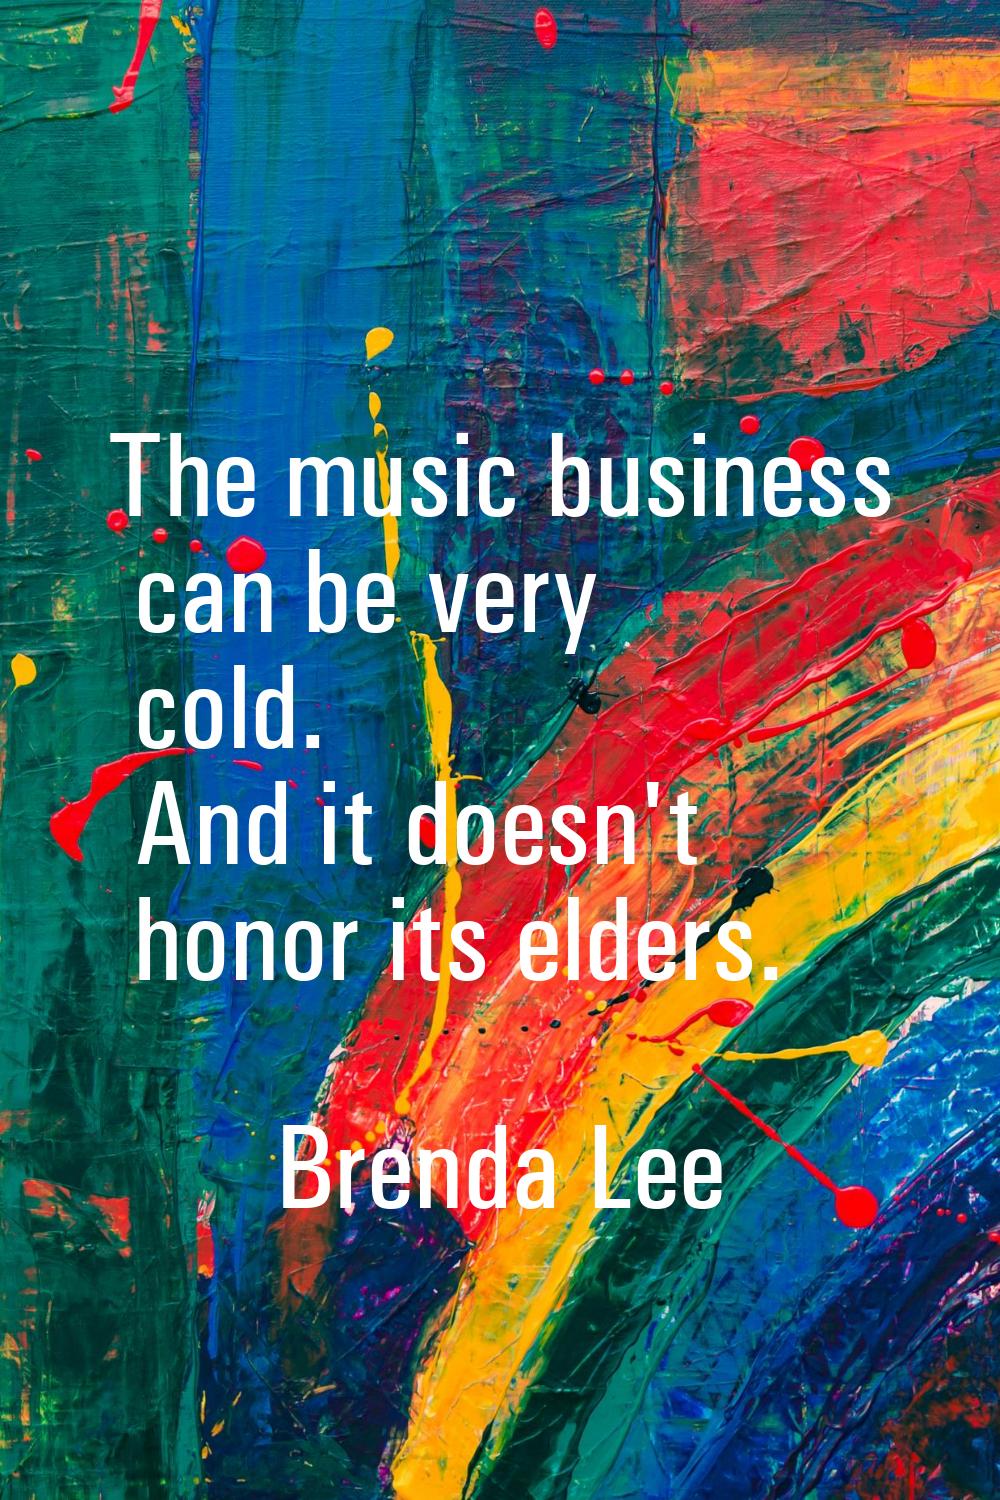 The music business can be very cold. And it doesn't honor its elders.